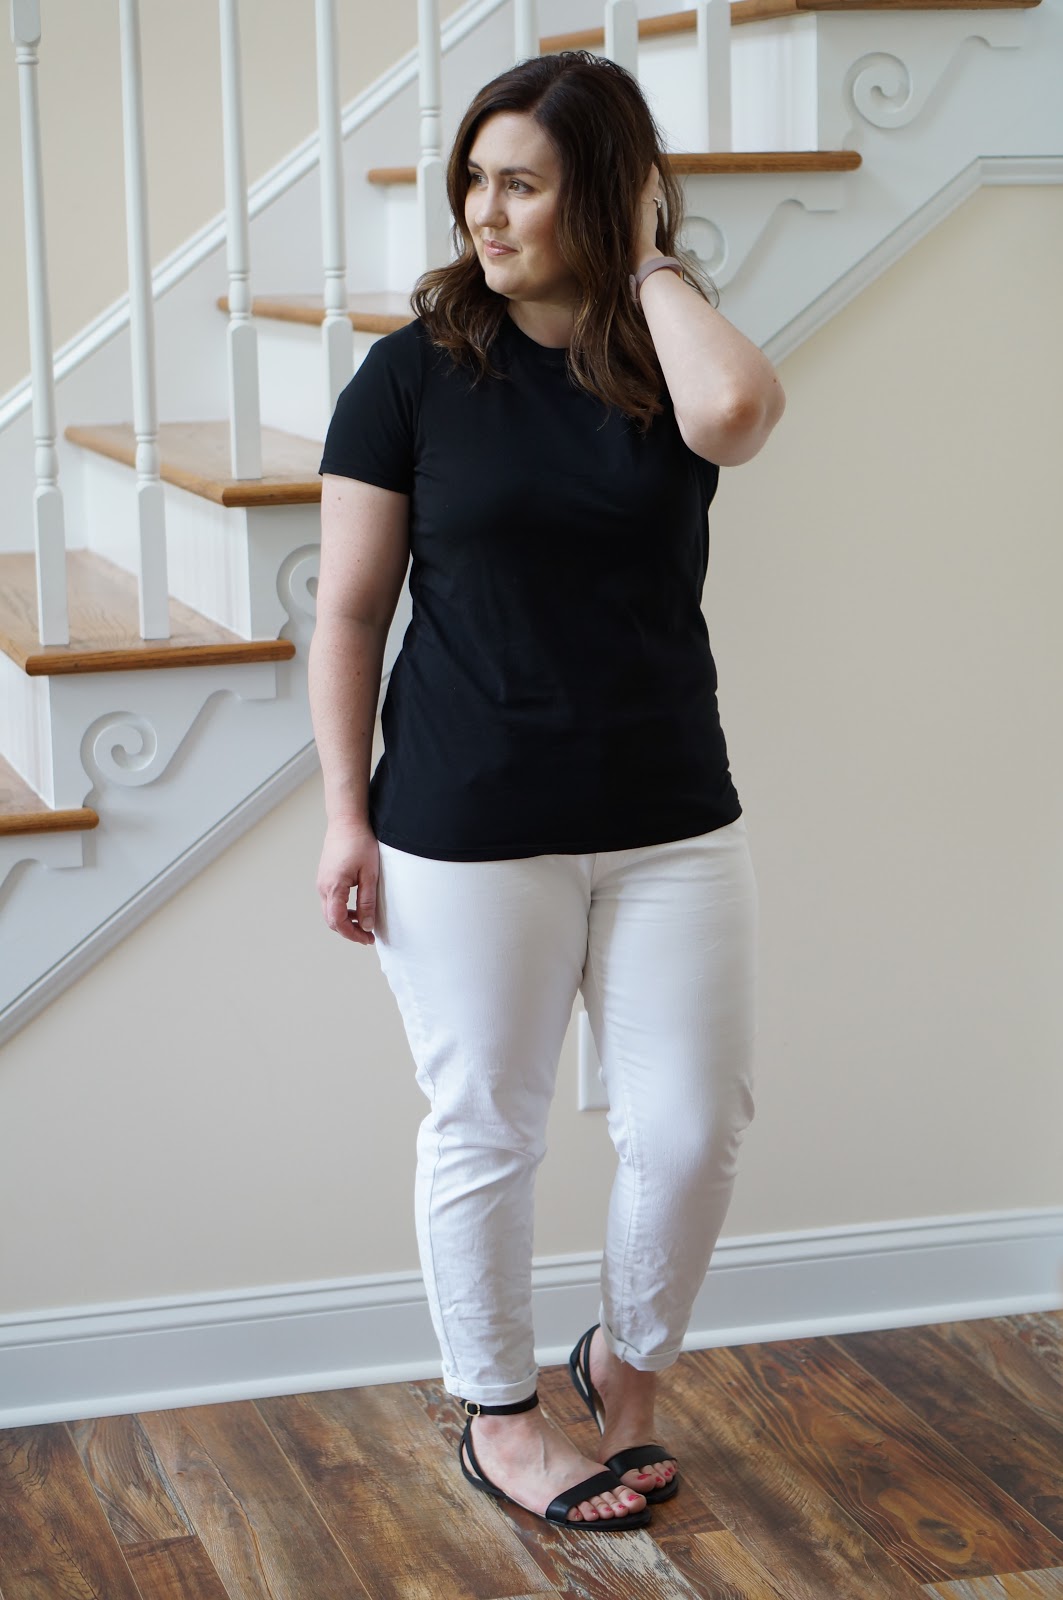 Popular North Carolina style blogger Rebecca Lately shares an easy back and white summer outfit.  Click here to read more now!